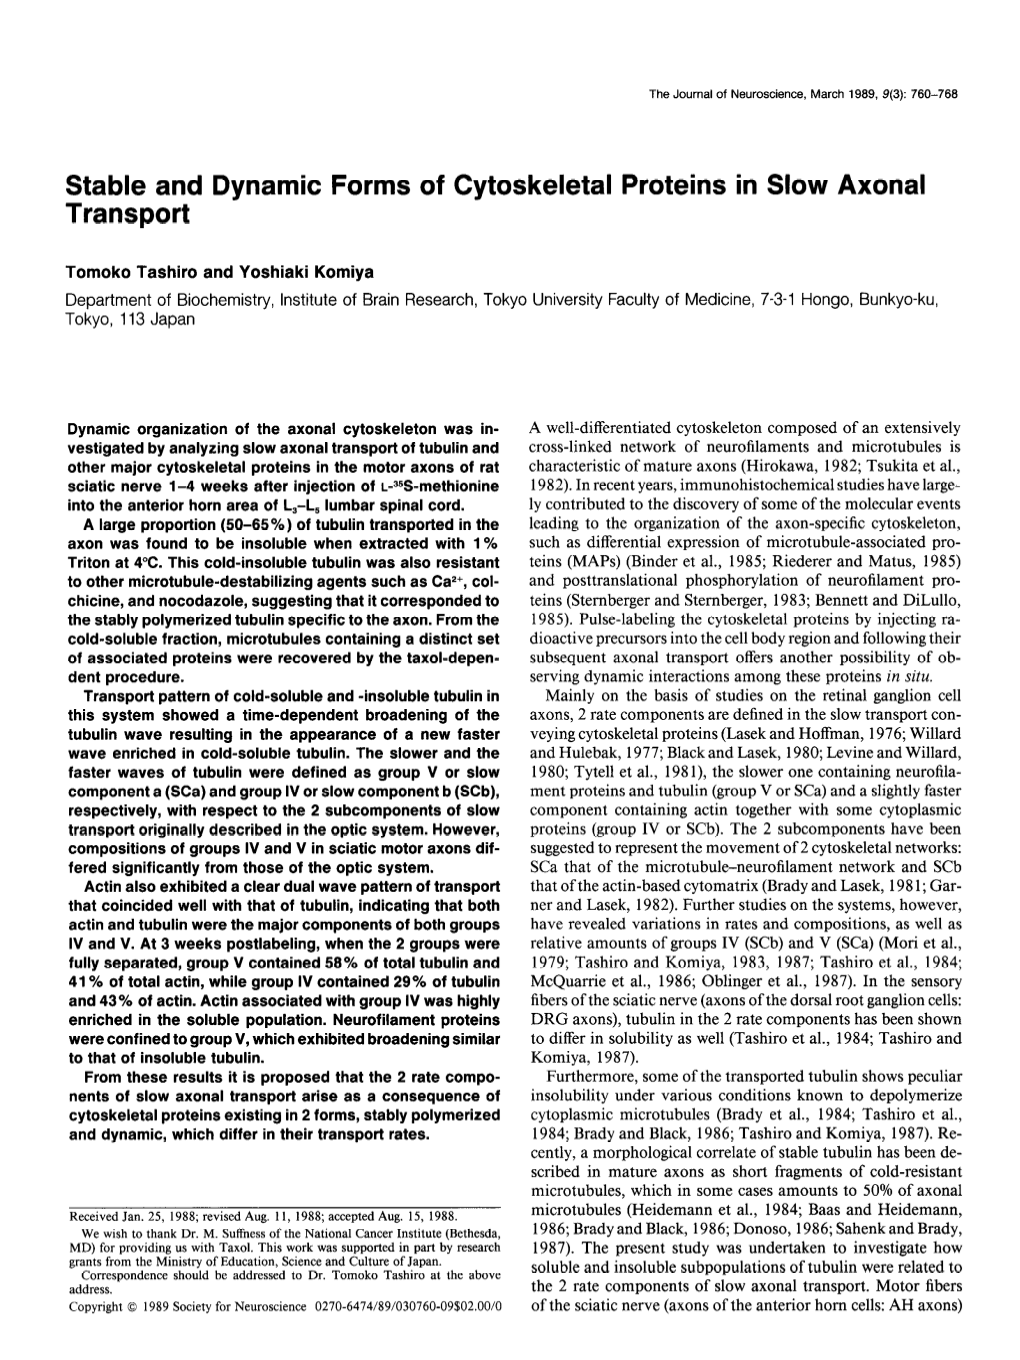 Stable and Dynamic Forms of Cytoskeletal Proteins in Slow Axonal Transport